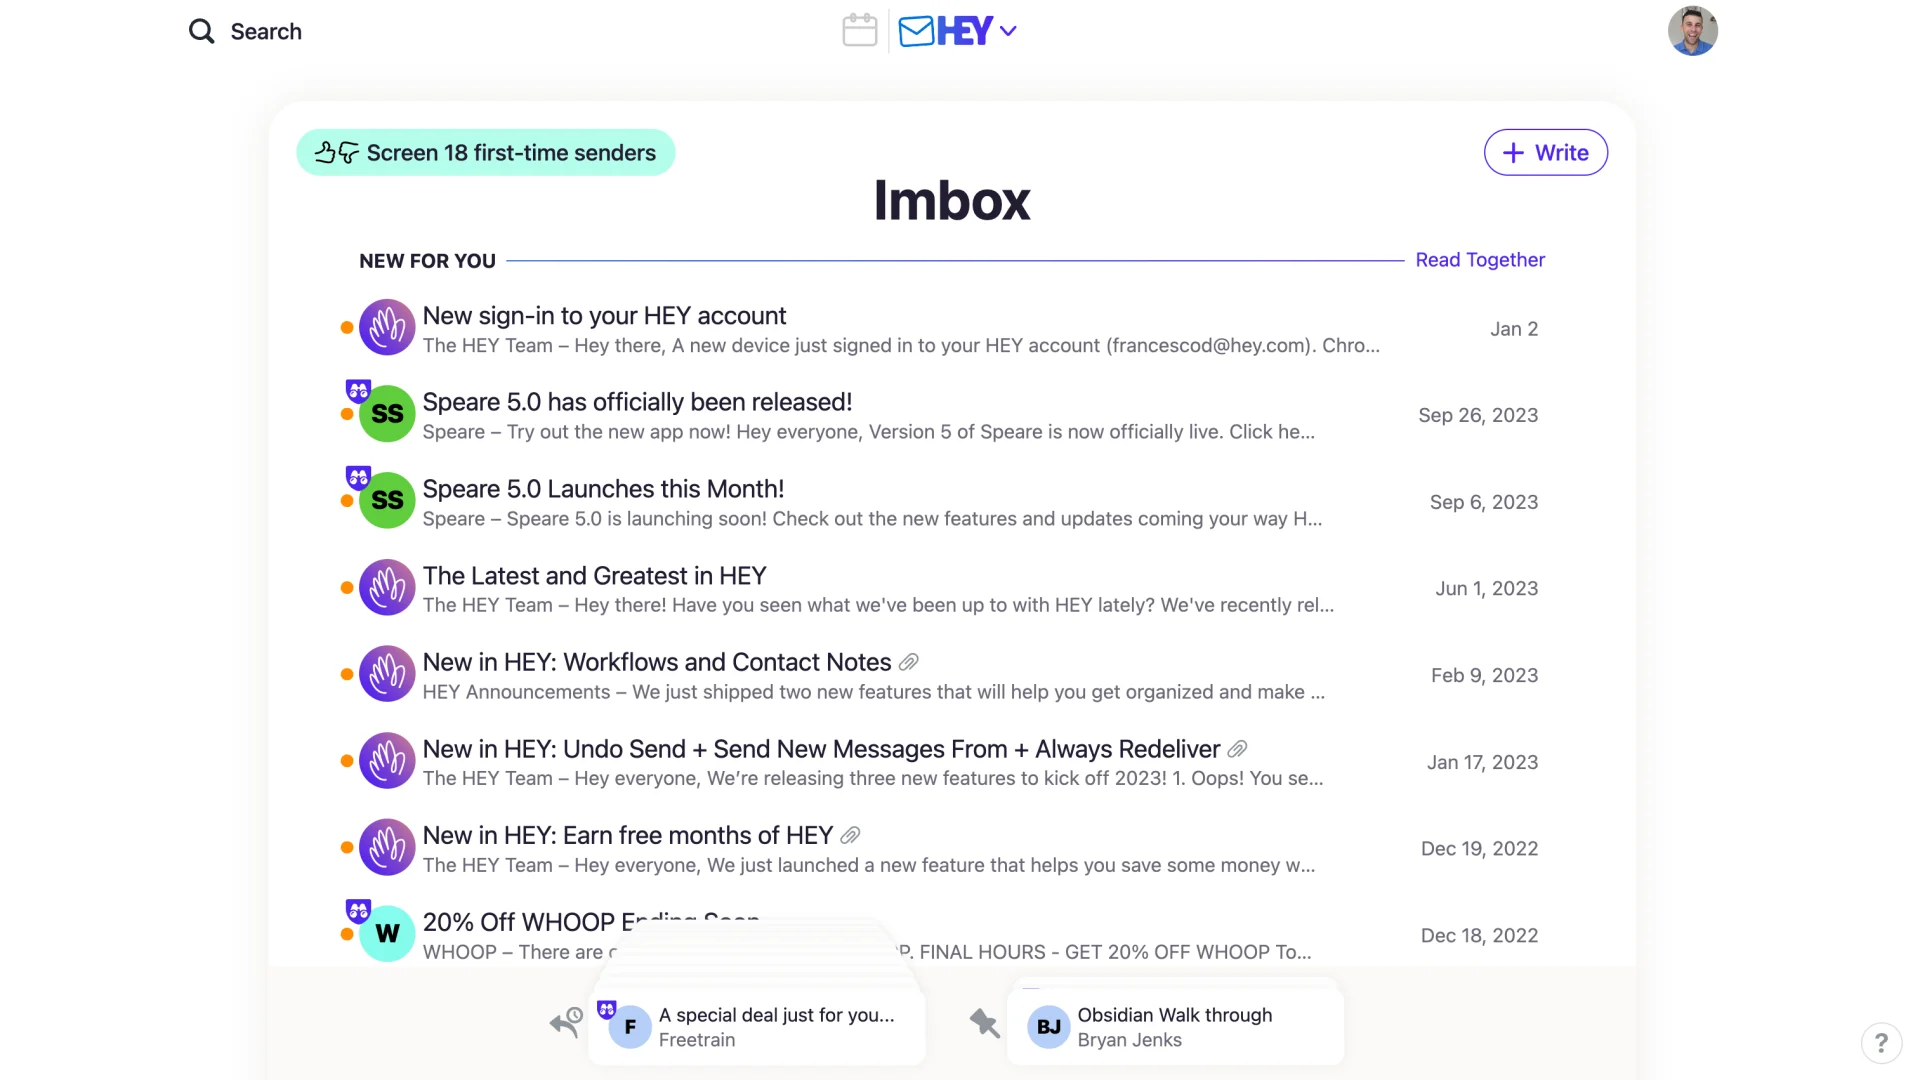 HEY Email, Managing Your Inbox, Email Management with Imbox